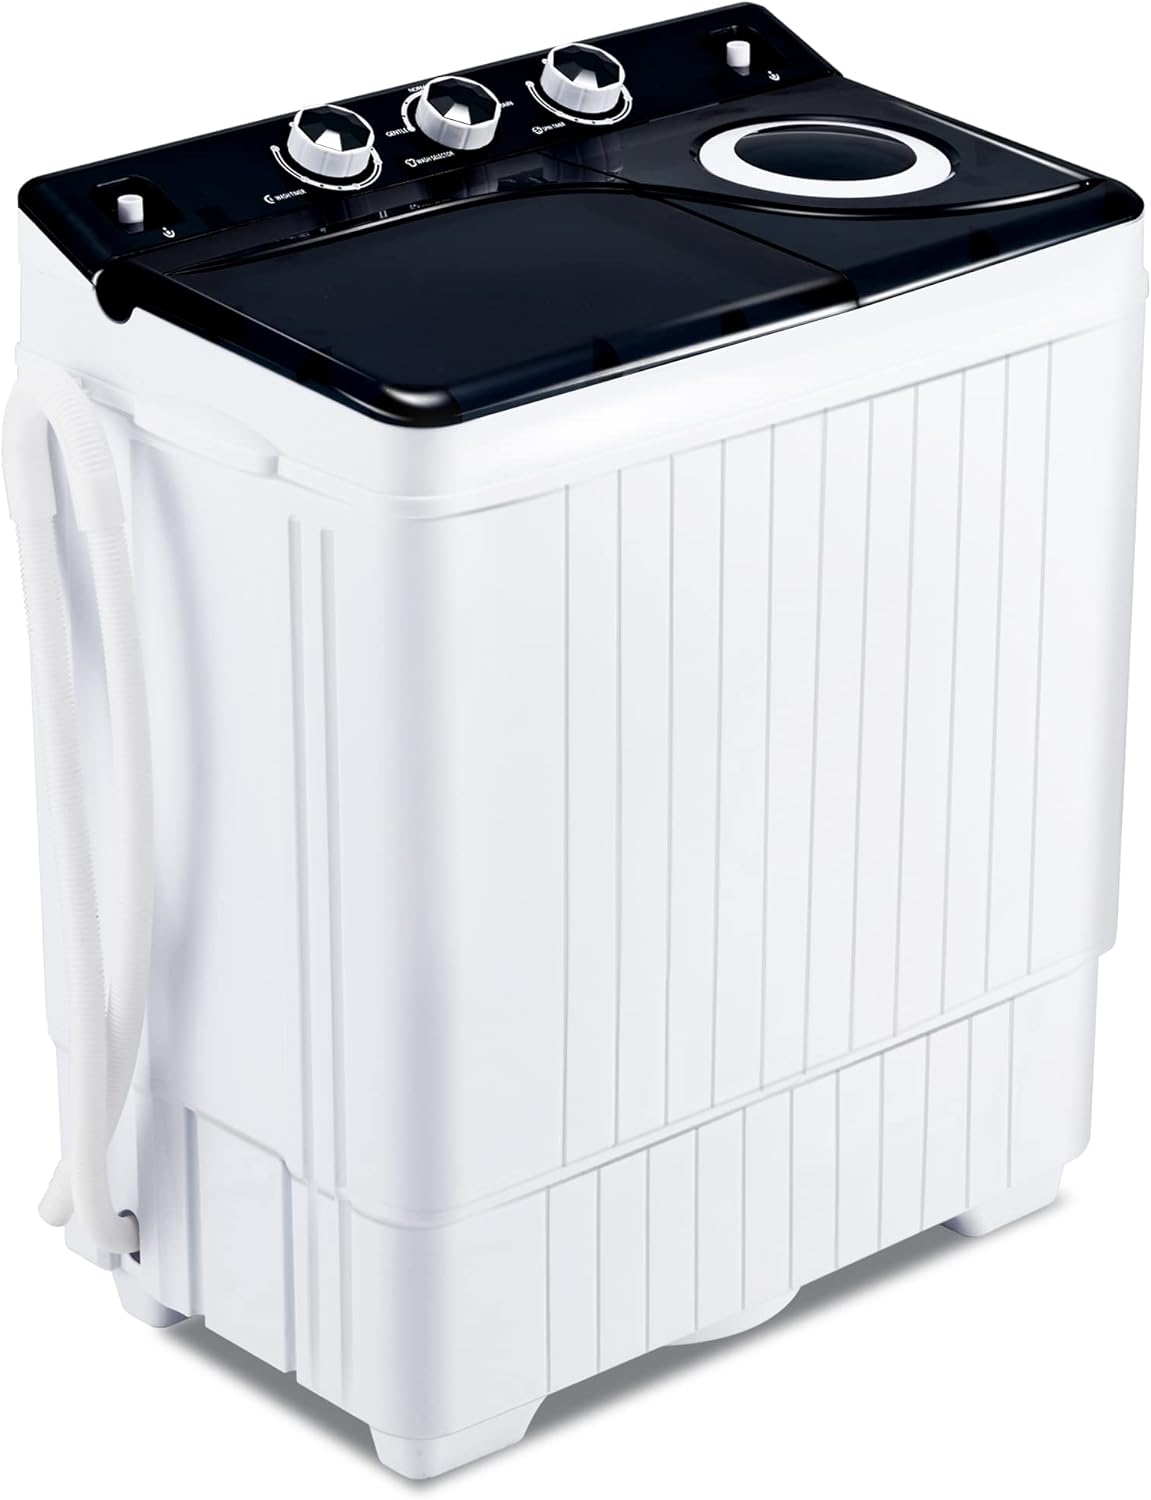 Portable Washing machine 26Lbs Capacity Washer and Dryer Combo Compact Twin Tub Laundry Washer(18Lbs) & Spinner(8Lbs) with Built-in Gravity Drain for Apartment,Dorms,RV Camping, BLACK